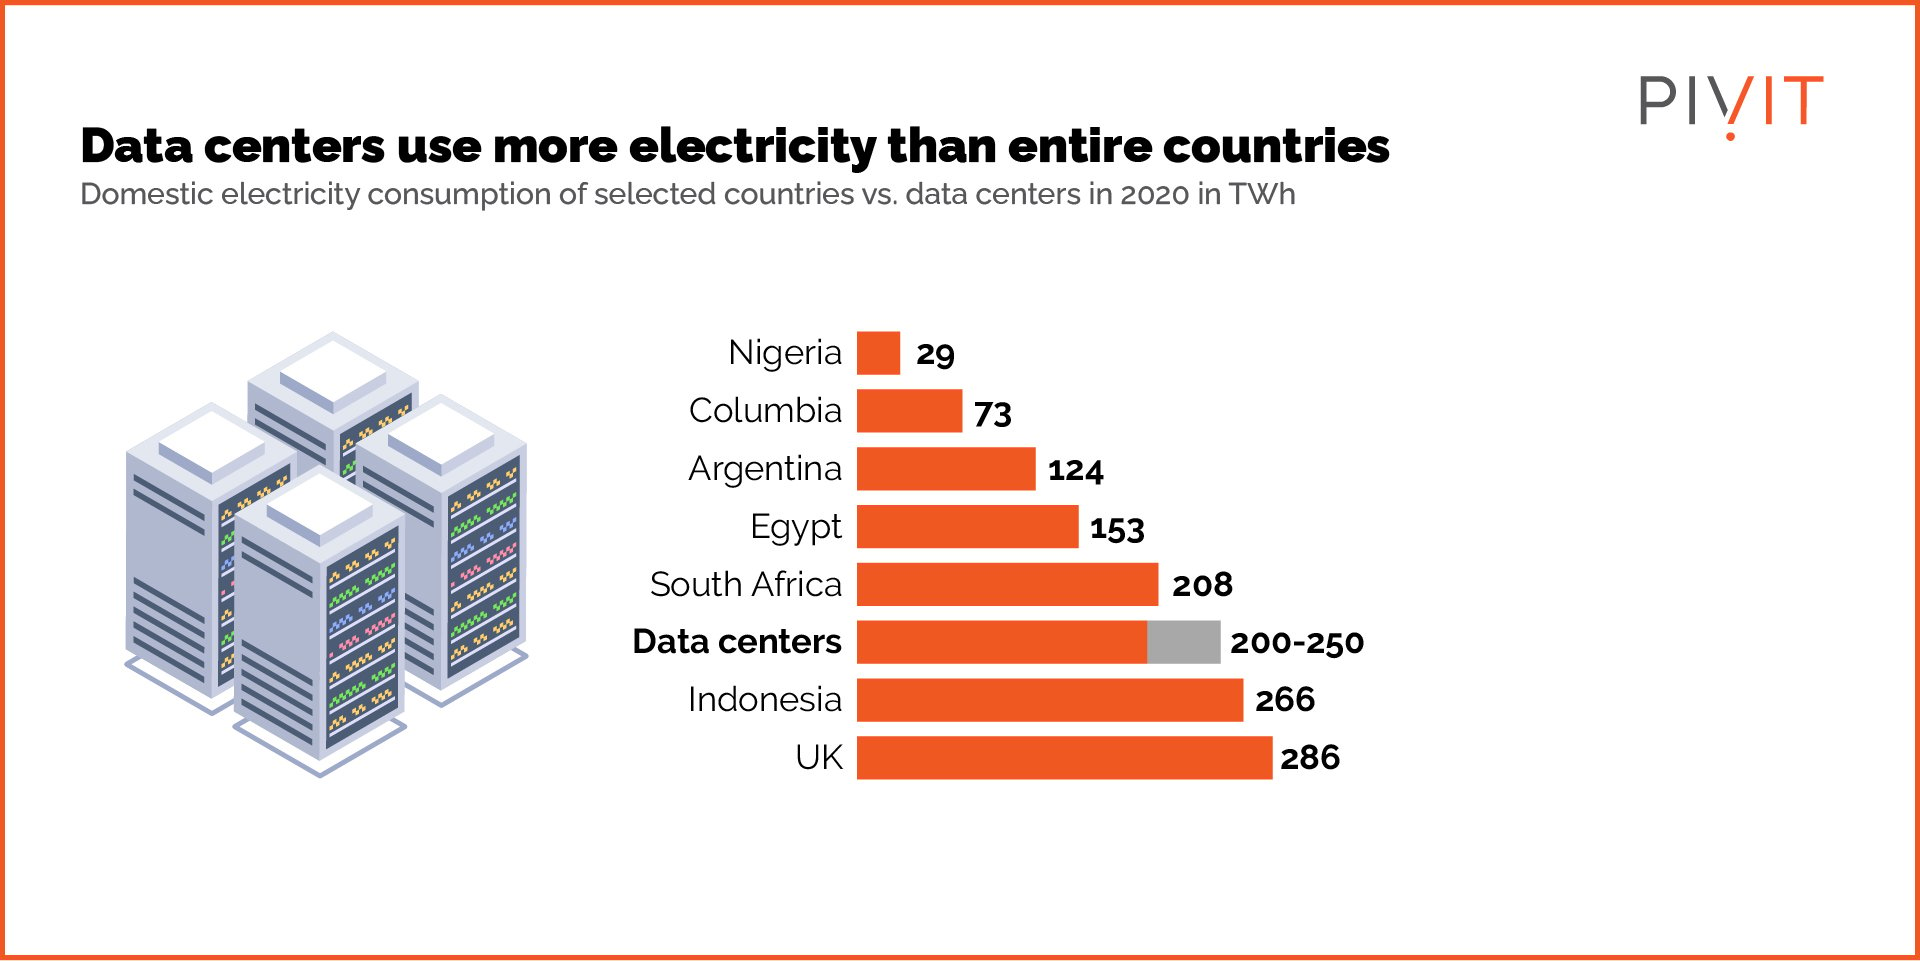 Domestic electricity consumption of selected countries vs. data centers in 2020 in TWh